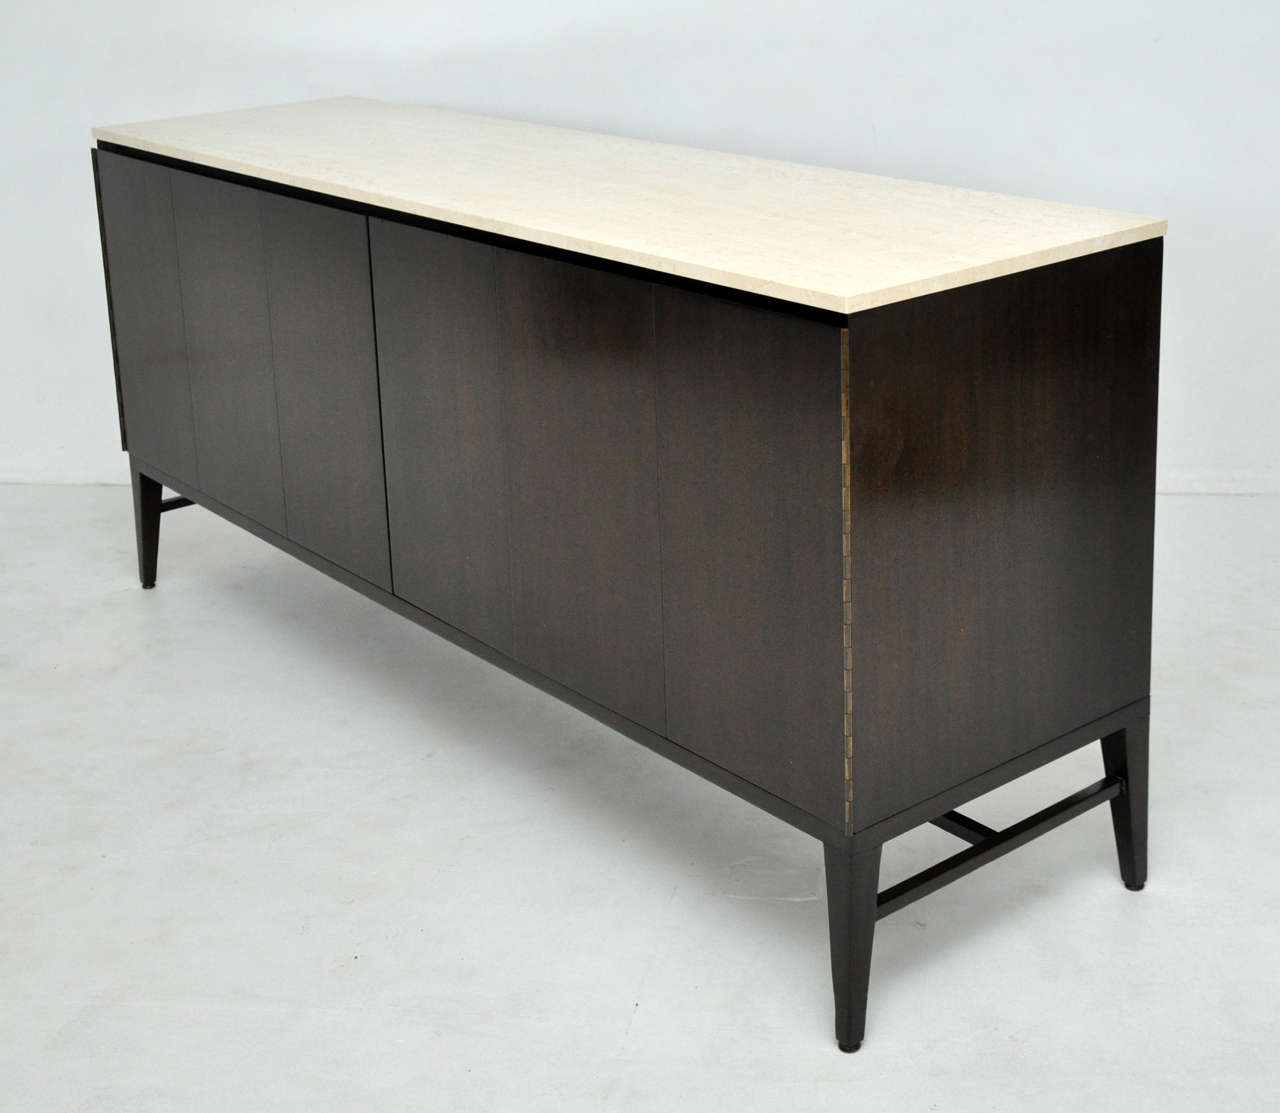 Dark espresso finish sideboard with travertine top.  Designed by Paul McCobb for Calvin Furniture.